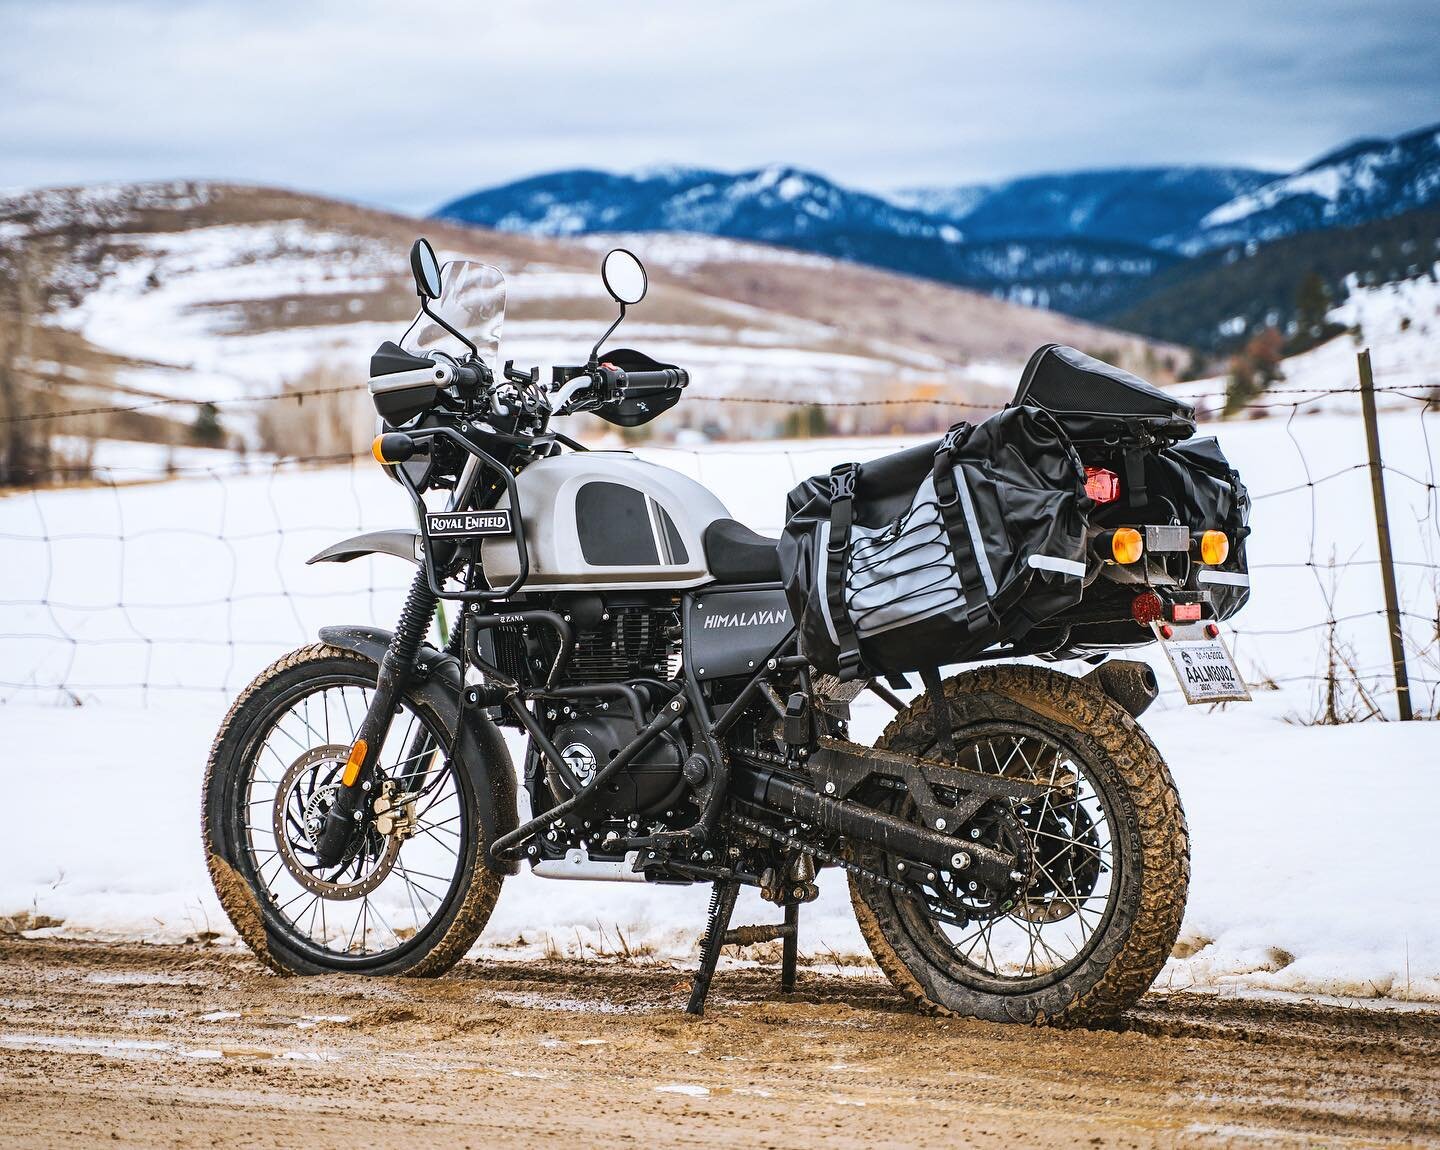 Went for a 30 mile cruise around town the other day while running work errands &amp; a quick detour to find some mud to get a little taste of what this Himalayan is capable of.

I was sliding around due to the few inches of mud engulfing the tires- b